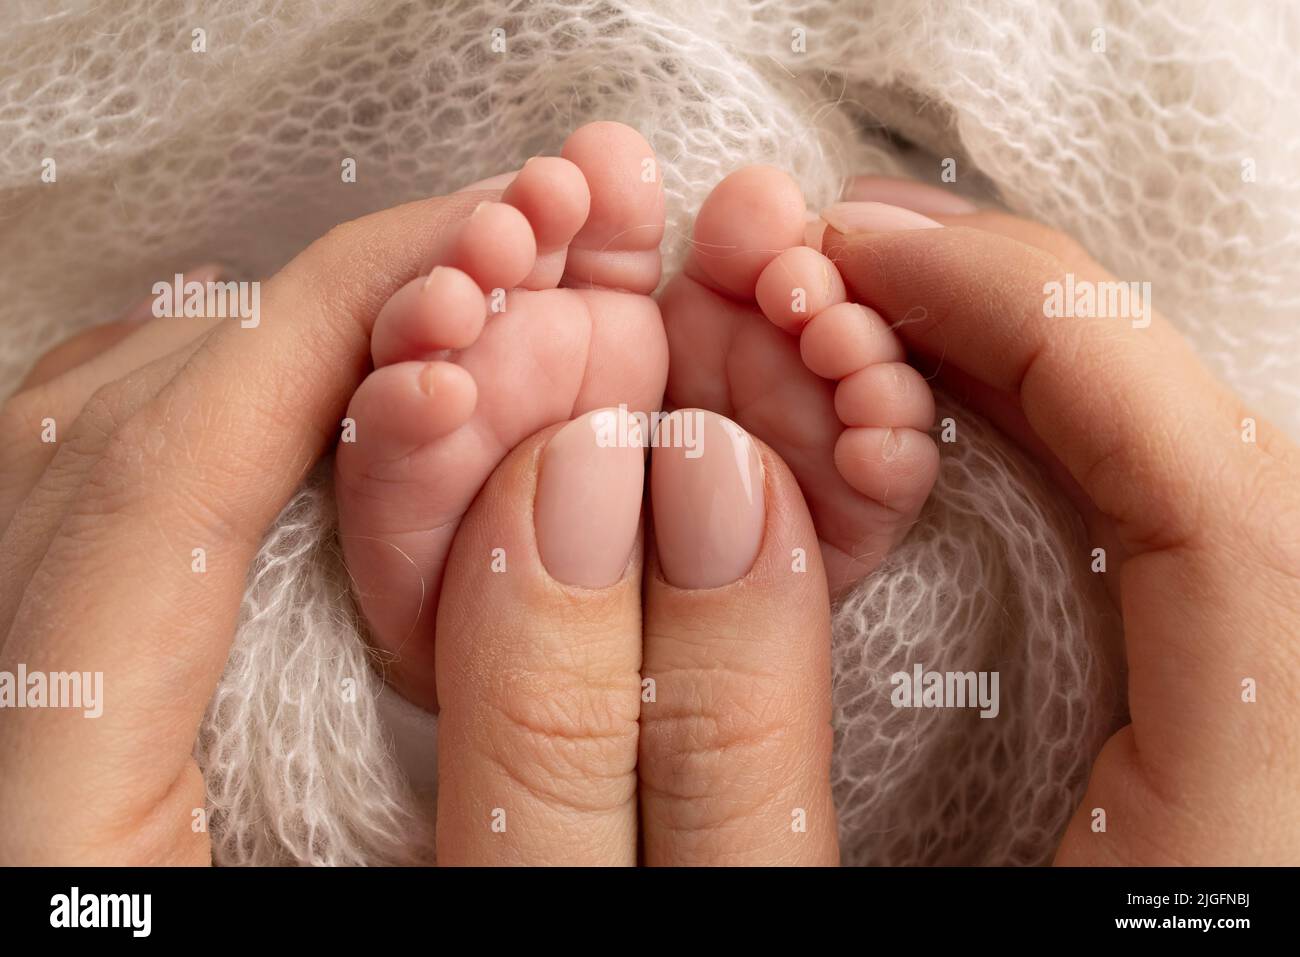 A new born baby's feet next to her mothers hand shows just how tiny babies  really are Stock Photo - Alamy